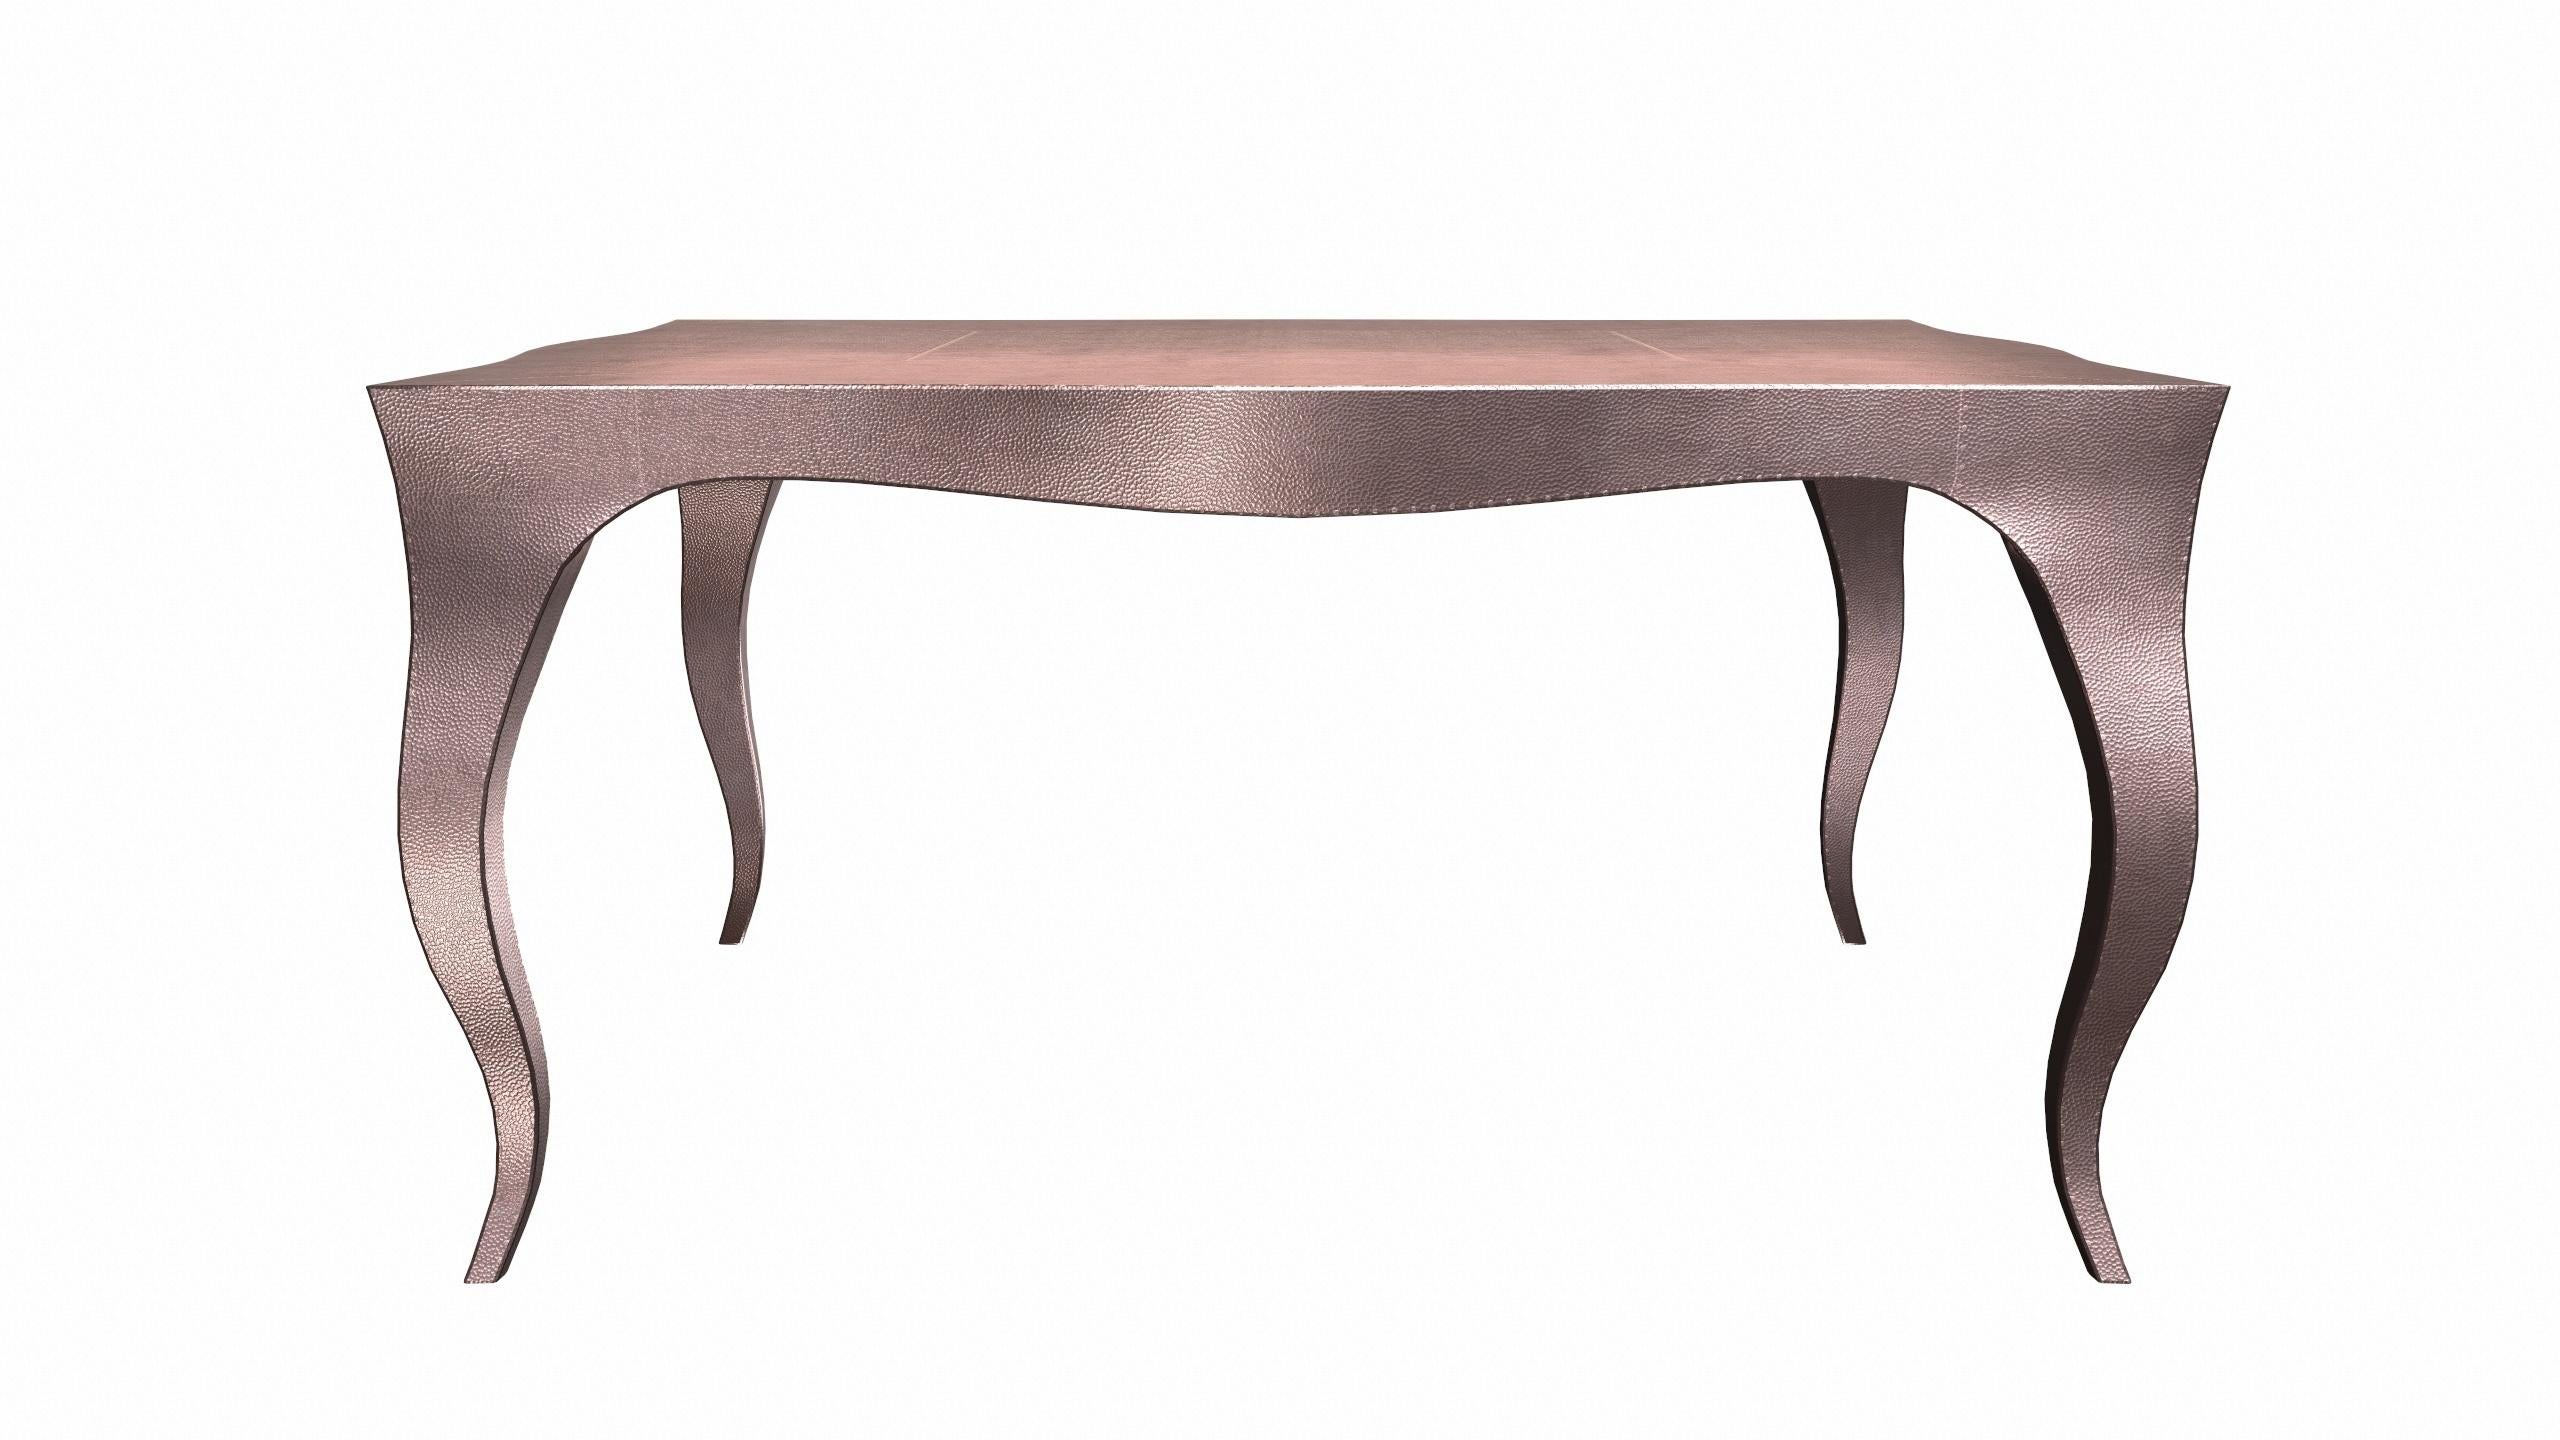 American Louise Art Deco Nesting Tables Mid. Hammered Copper 18.5x18.5x10 inch by Paul M. For Sale